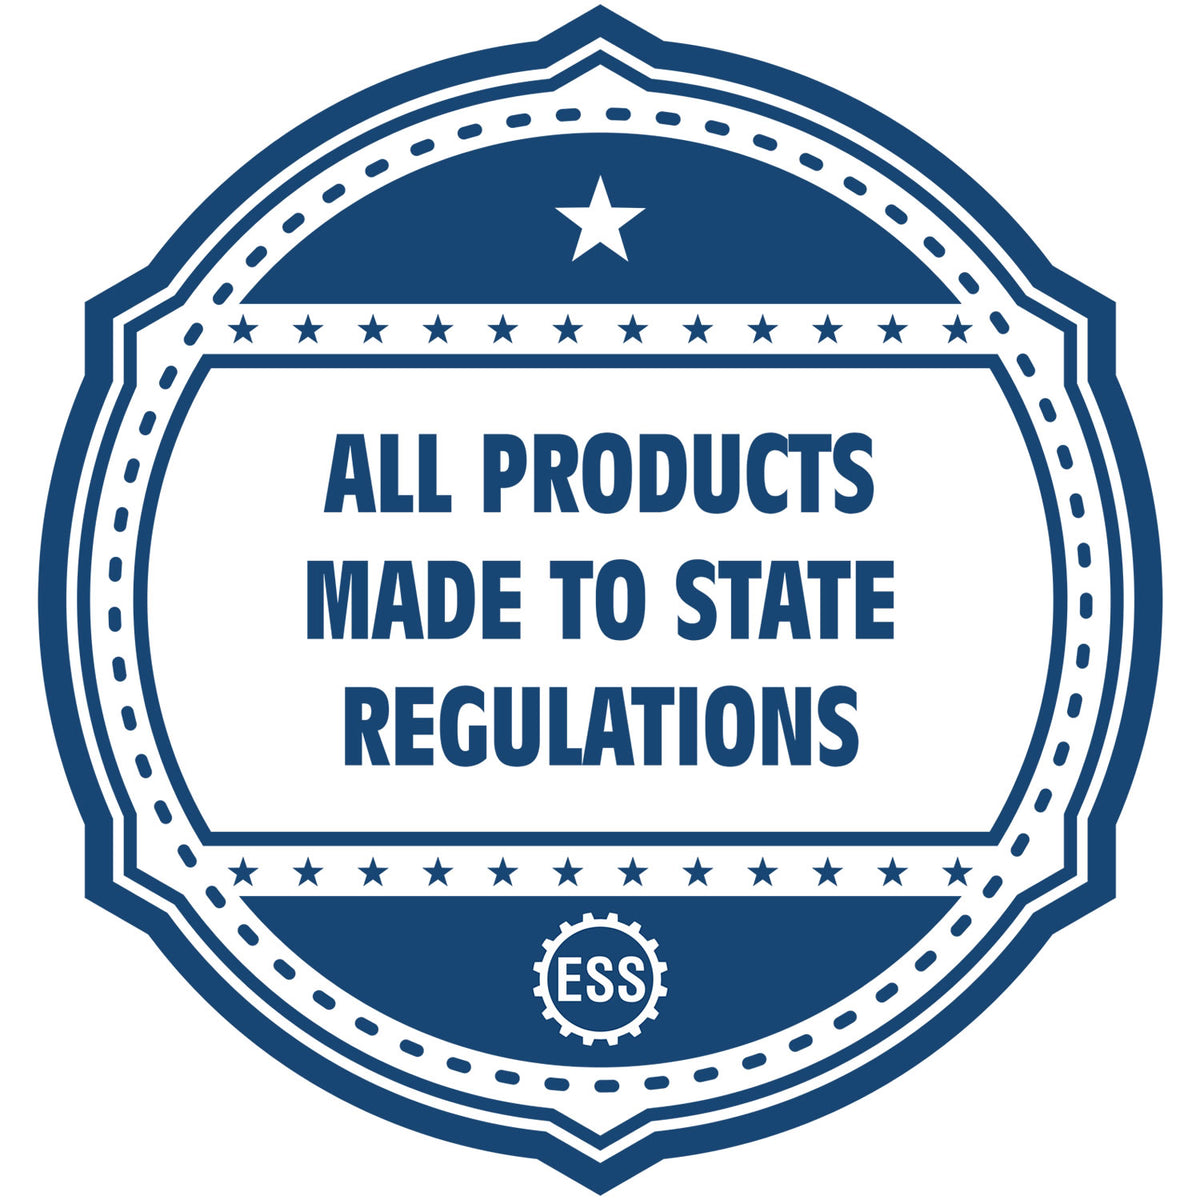 An icon or badge element for the Long Reach Connecticut PE Seal showing that this product is made in compliance with state regulations.